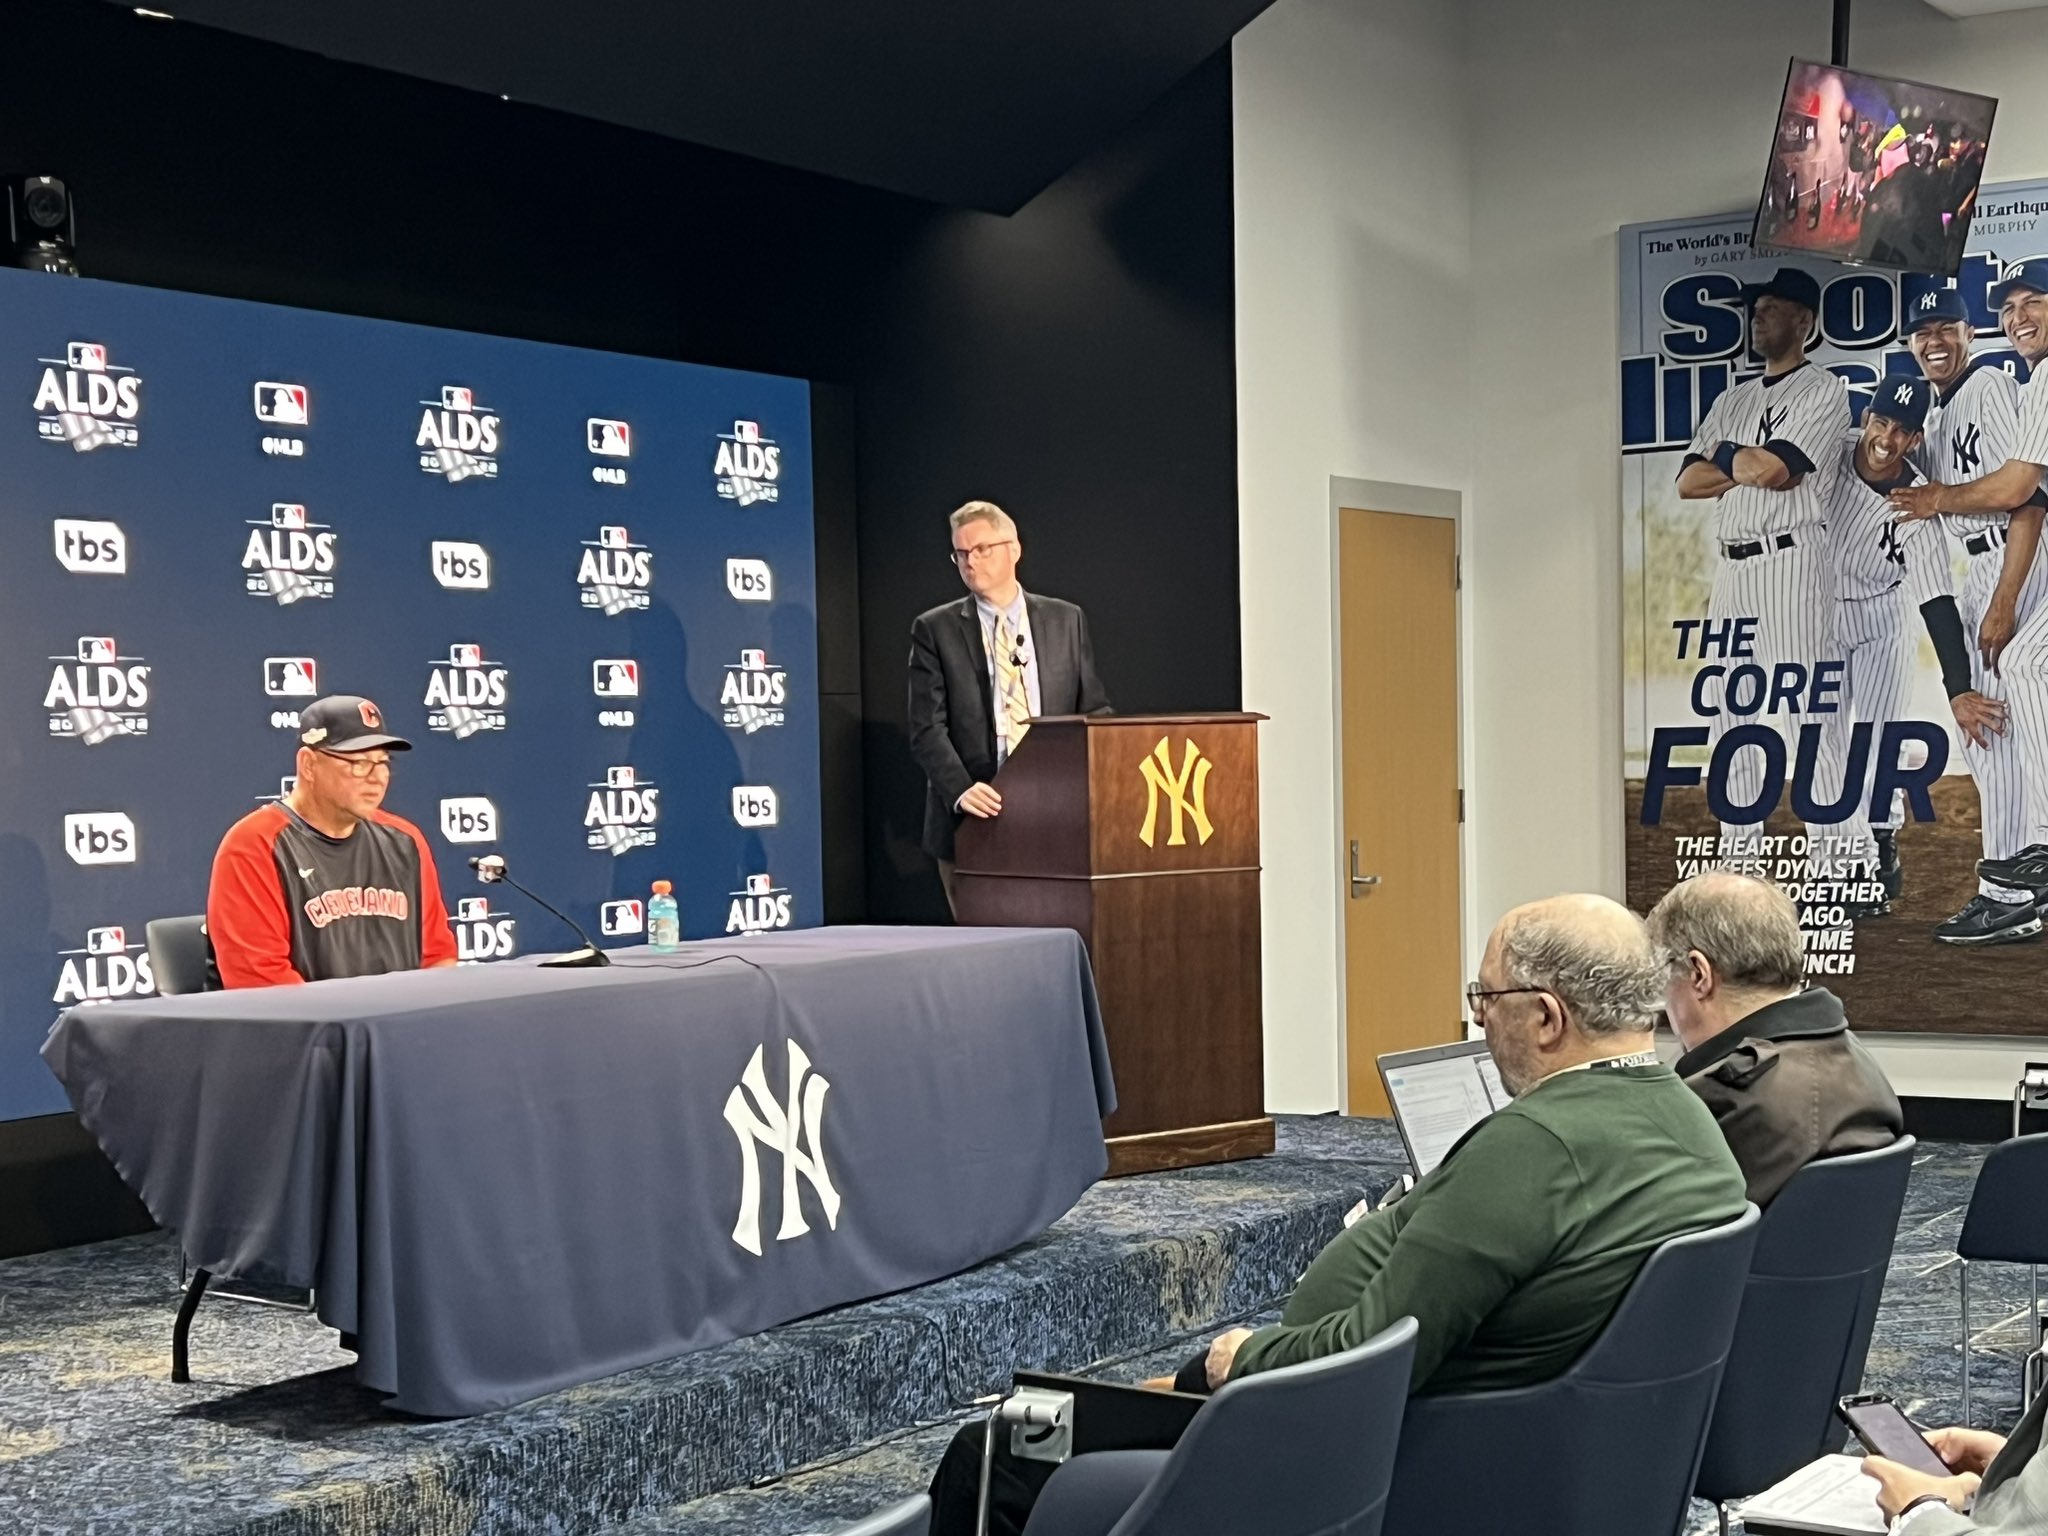 yankees press conference live